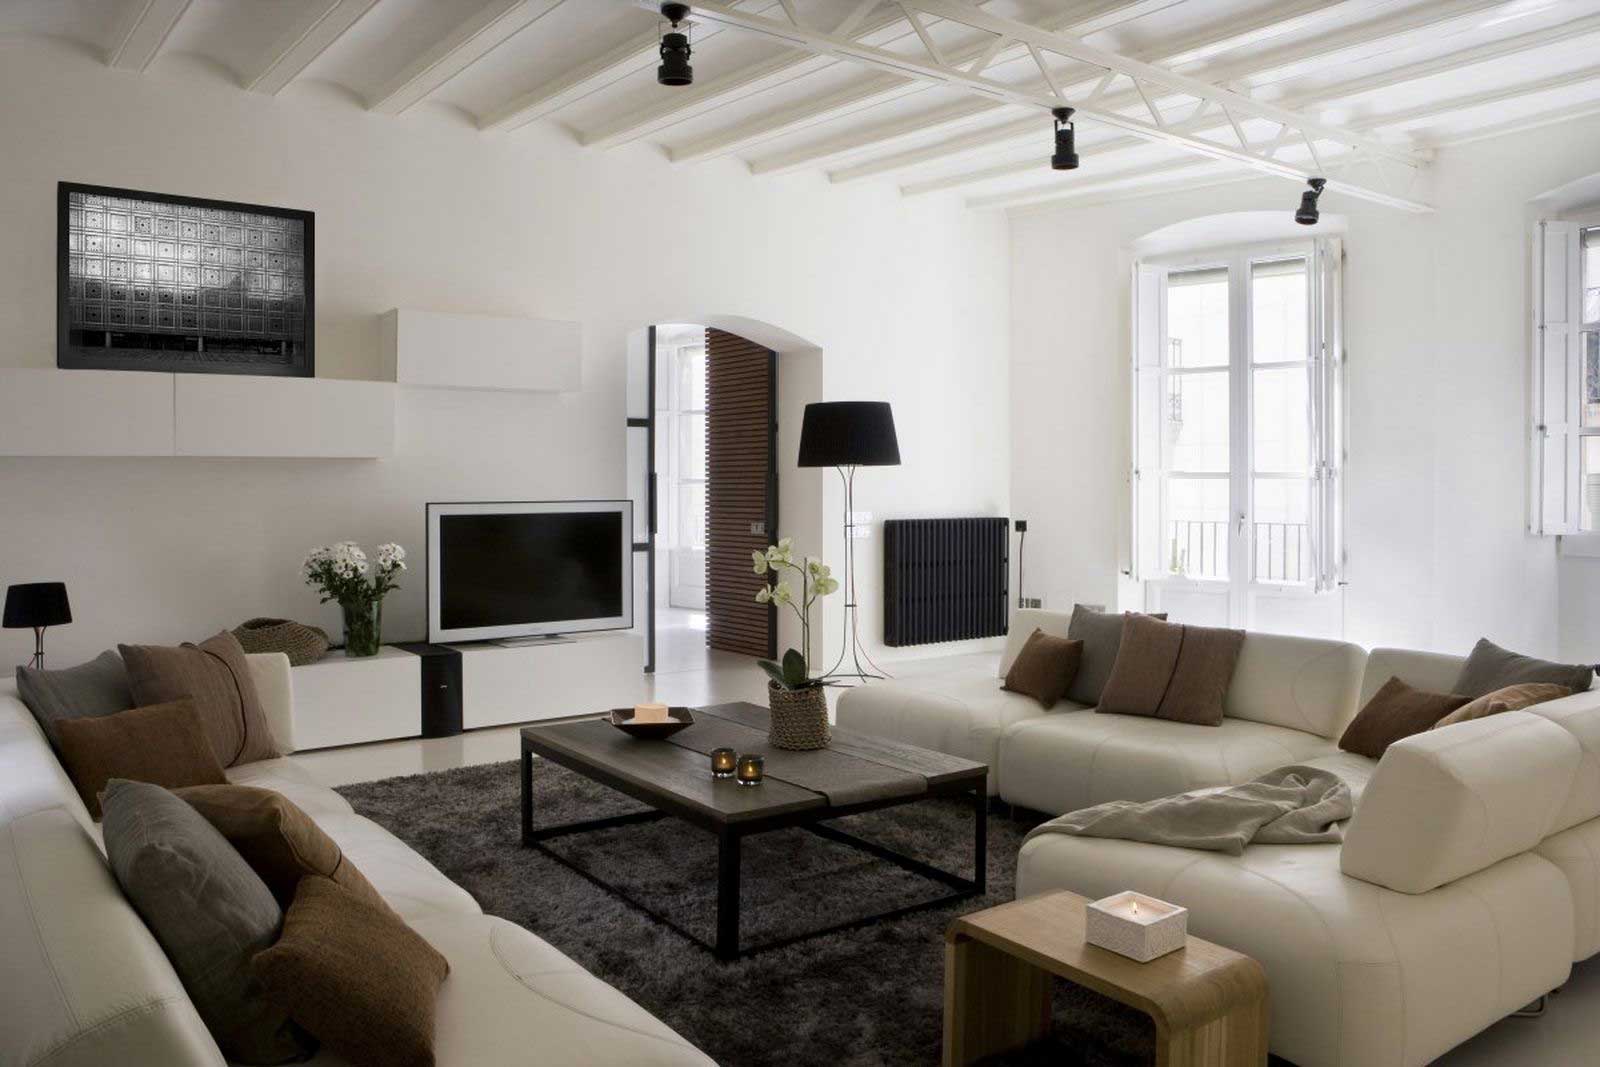 White Living With Contemporary White Living Room Design With Awesome Modern Living Room Ideas Along With Modern Minimalist Living Room Sofa Also Antique Living Room Fur Rug Design Ideas Interior Design 14 Attractive Living Room Ideas For Stylish Home Spaces